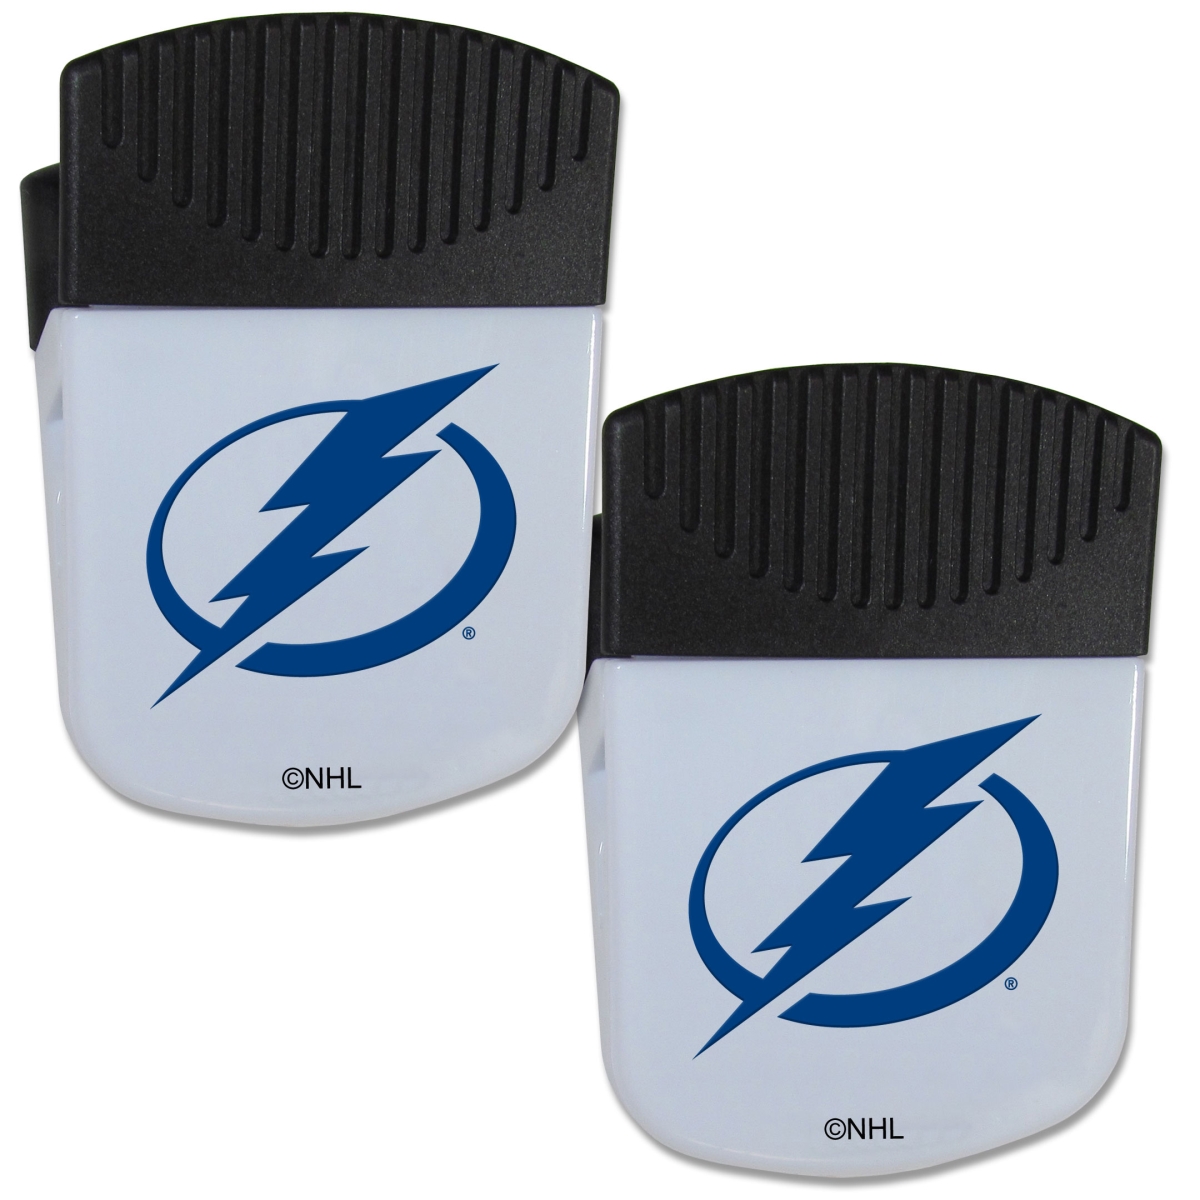 Picture of Siskiyou 2HPMC80 Unisex NHL Tampa Bay Lightning Chip Clip Magnet with Bottle Opener - Pack of 2